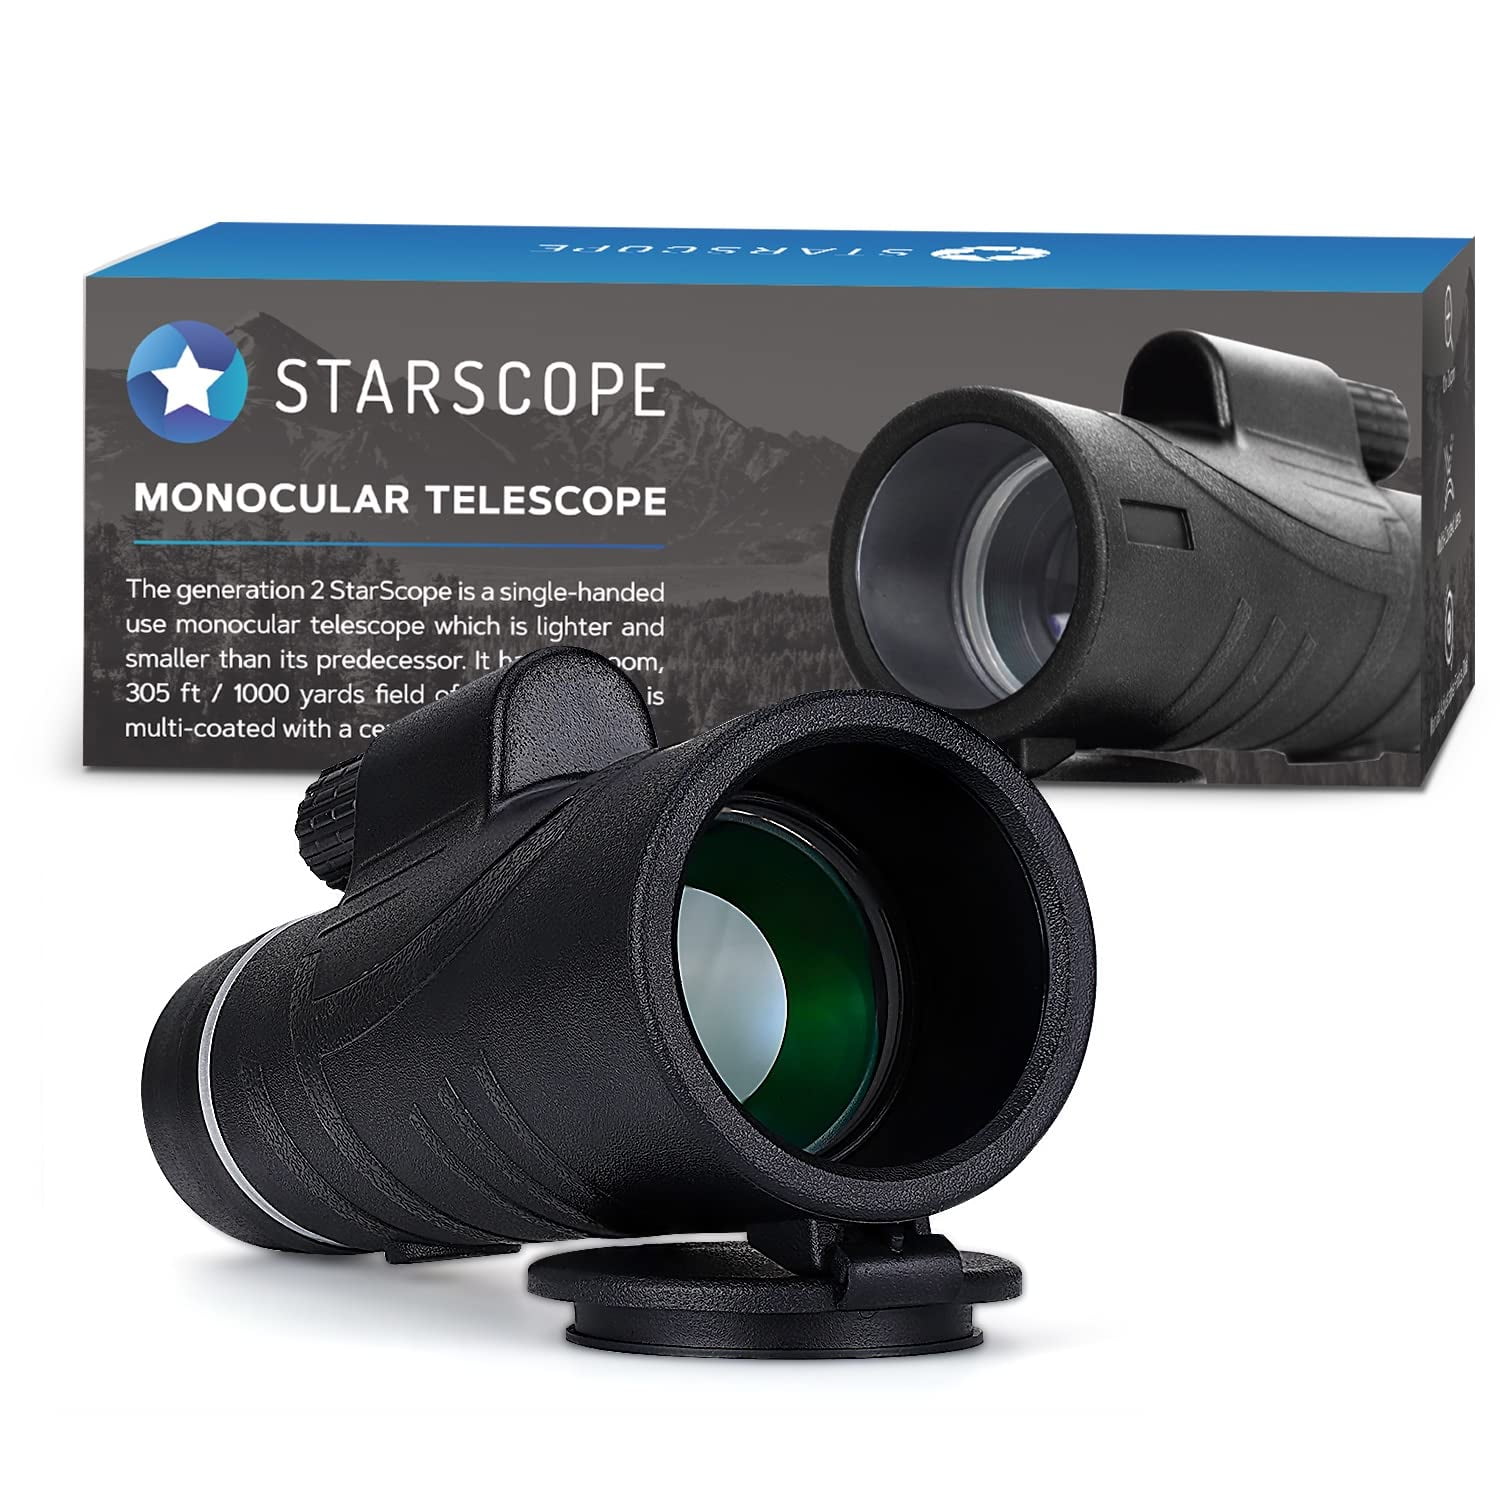 Starscope Monocular - 10X Monocular Telescope for Smartphone Photography with Wide Field of View (305 ft/1000yd)